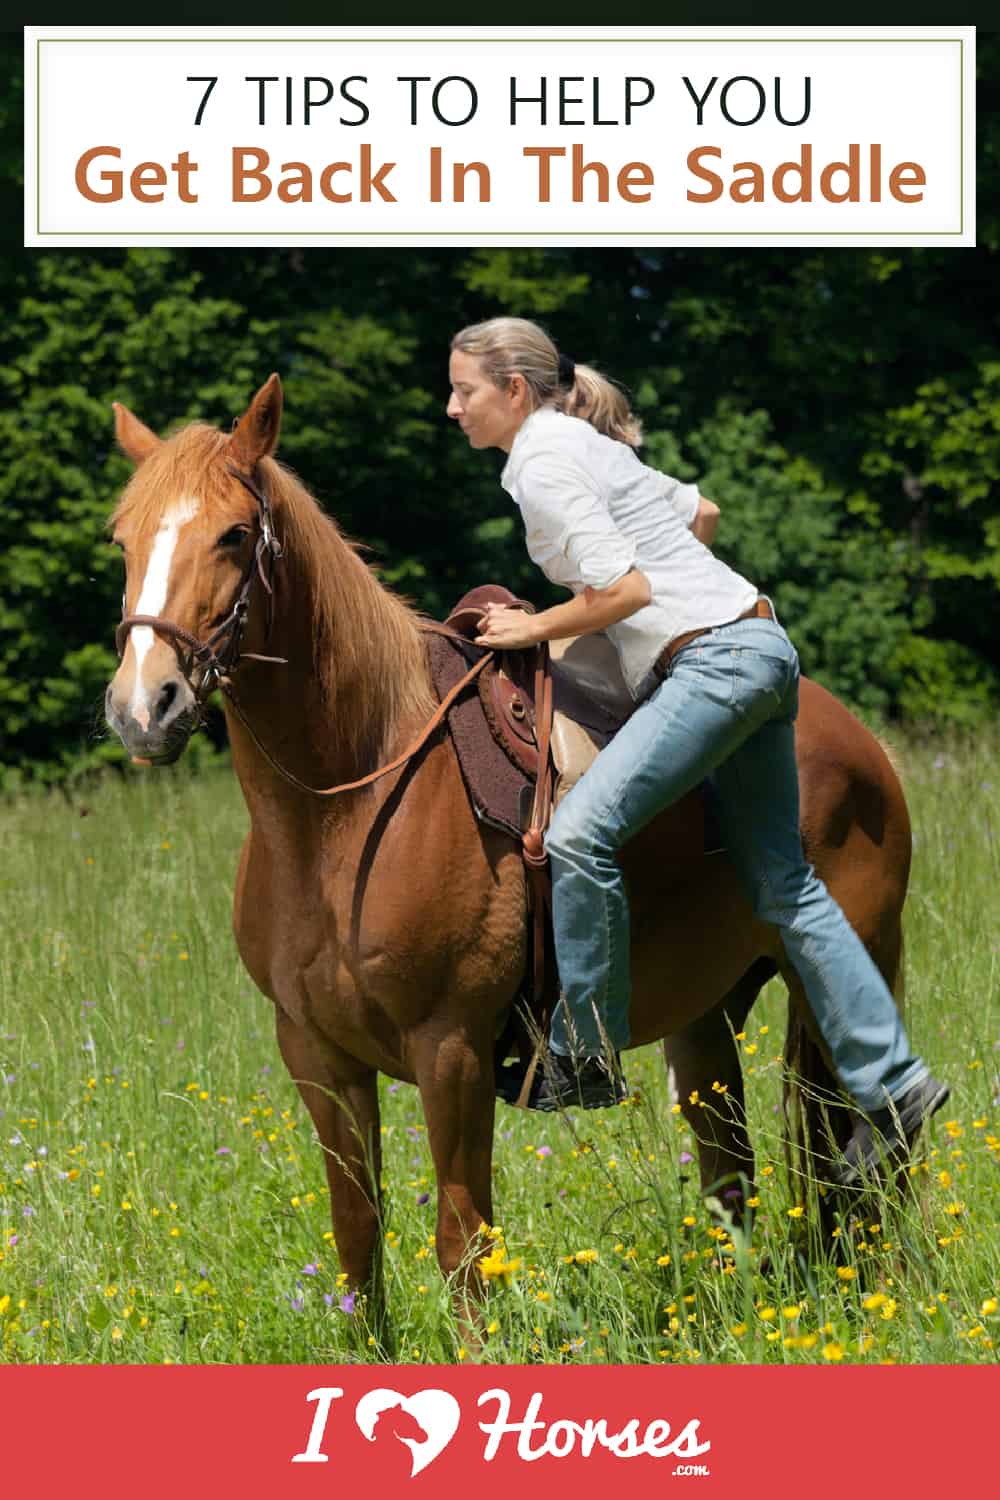 Tips To Help You Get Back In The Saddle